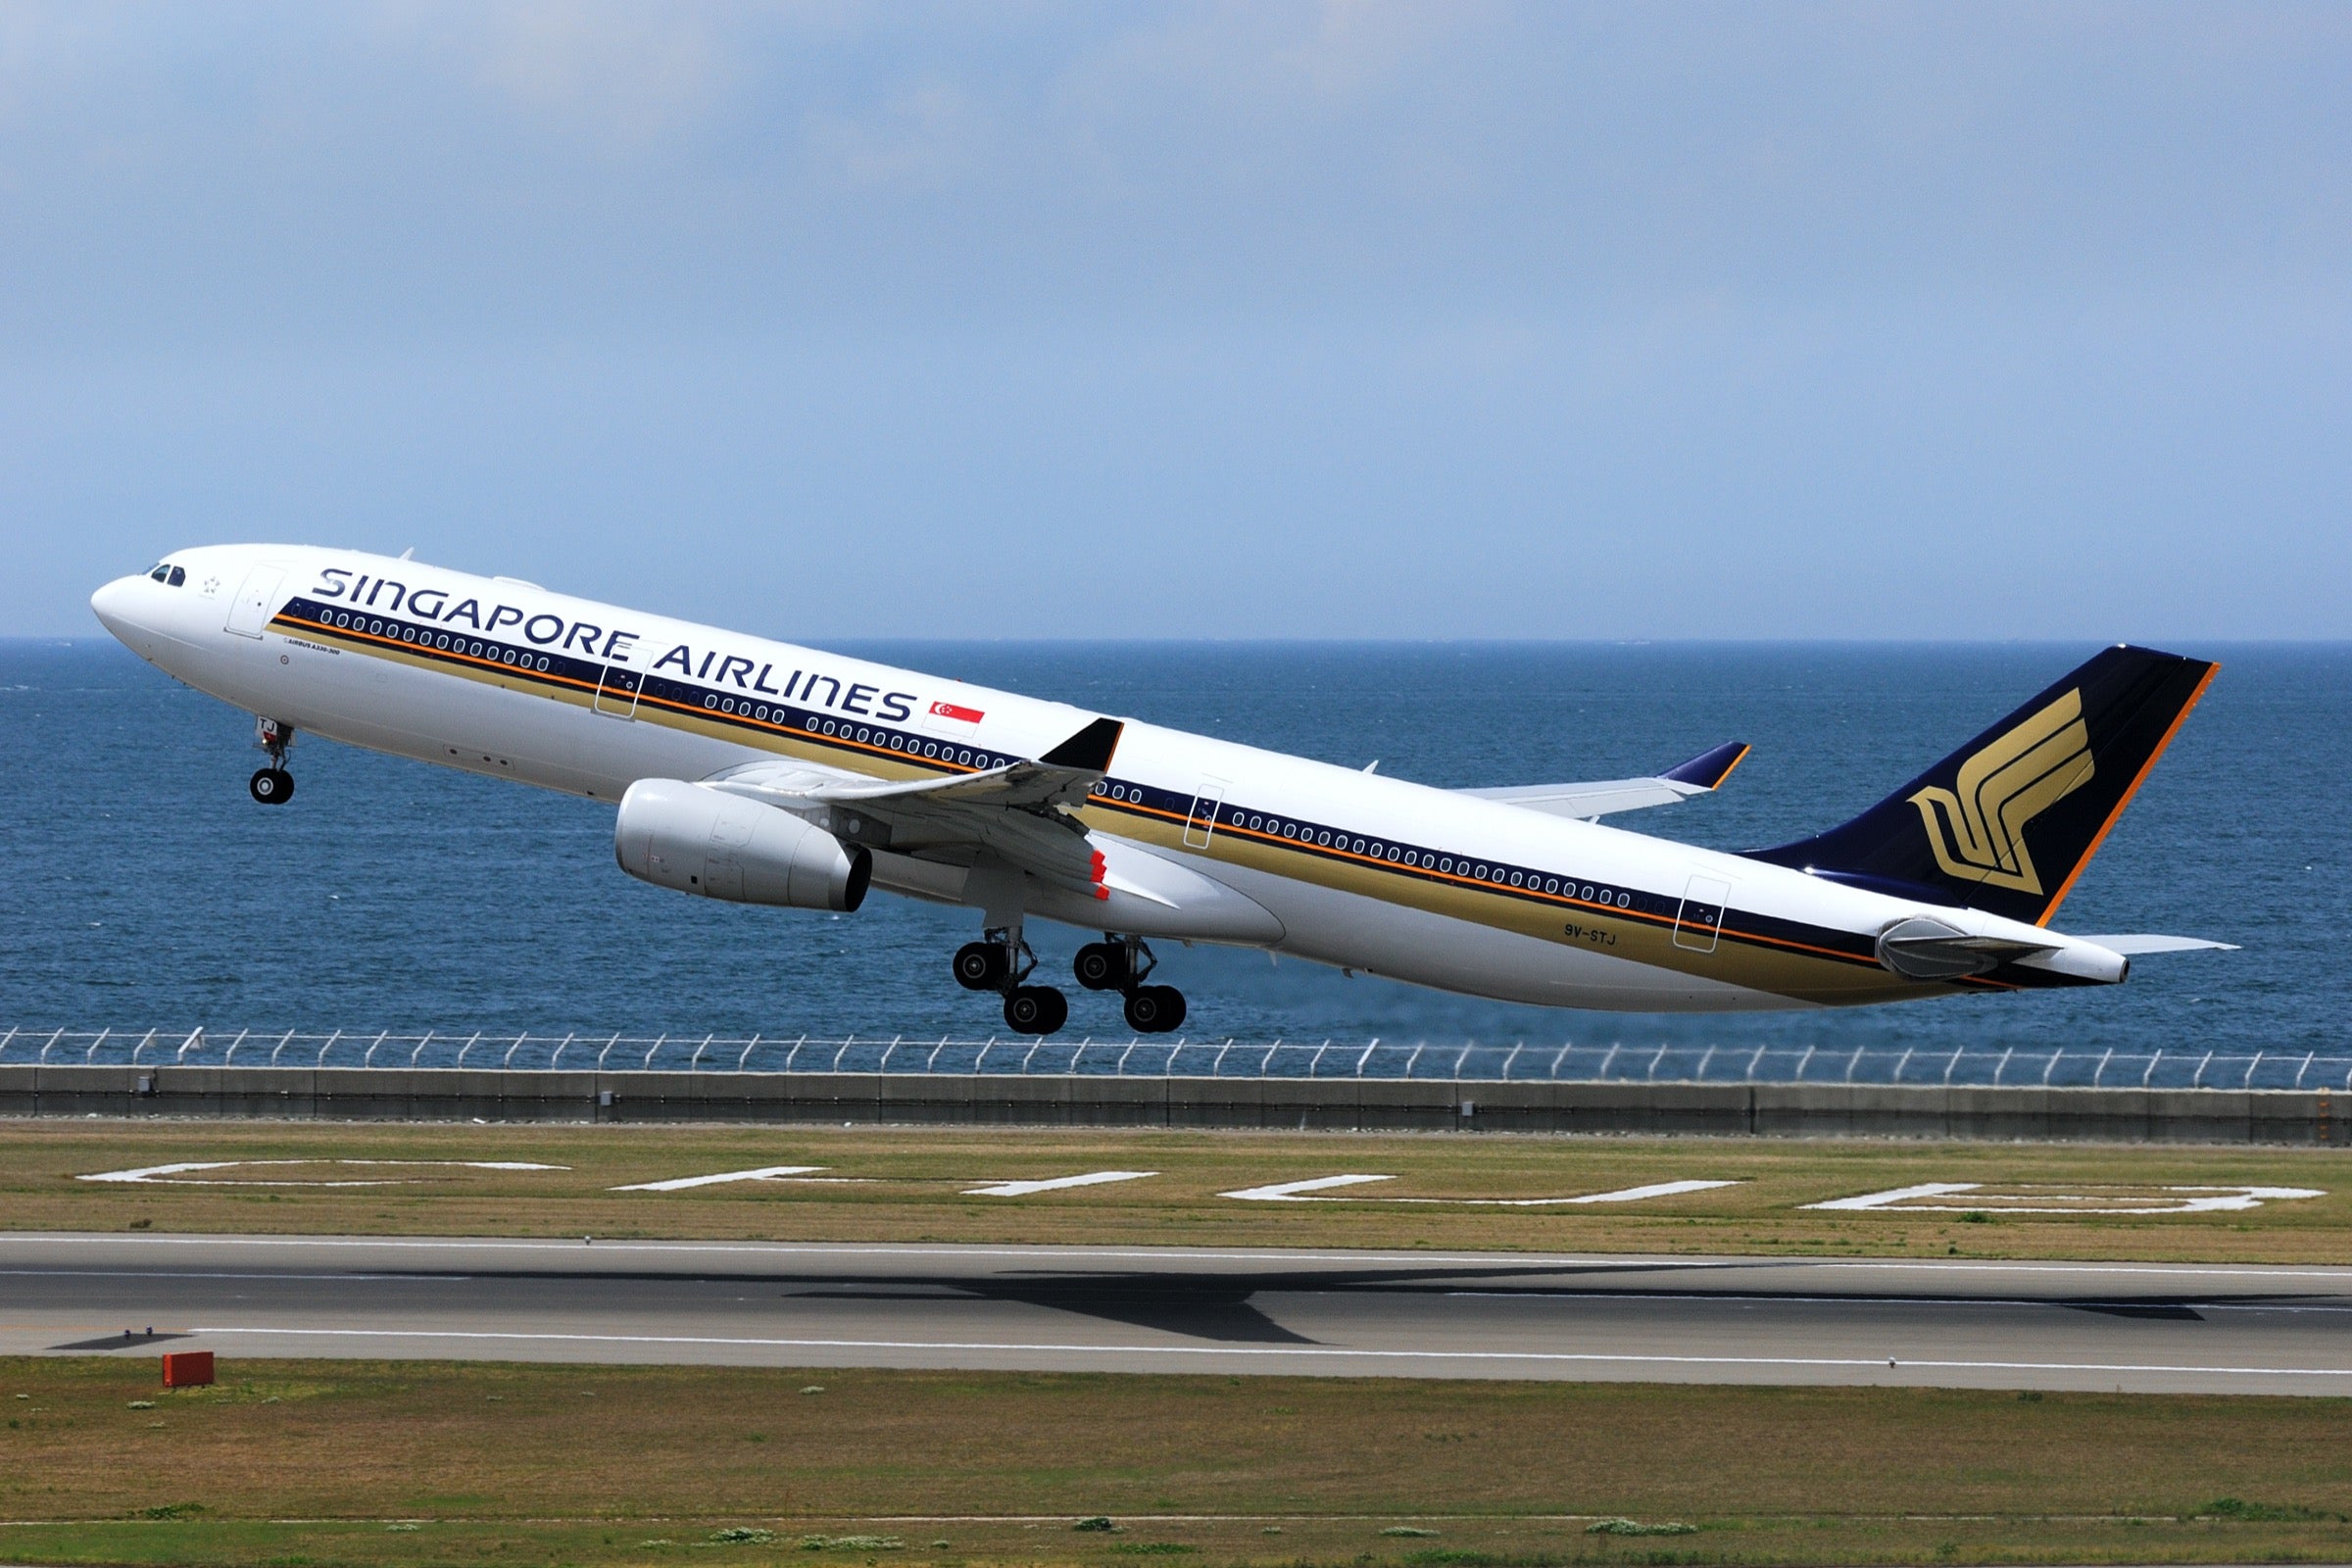 Singapore Airlines A330-300 taking off